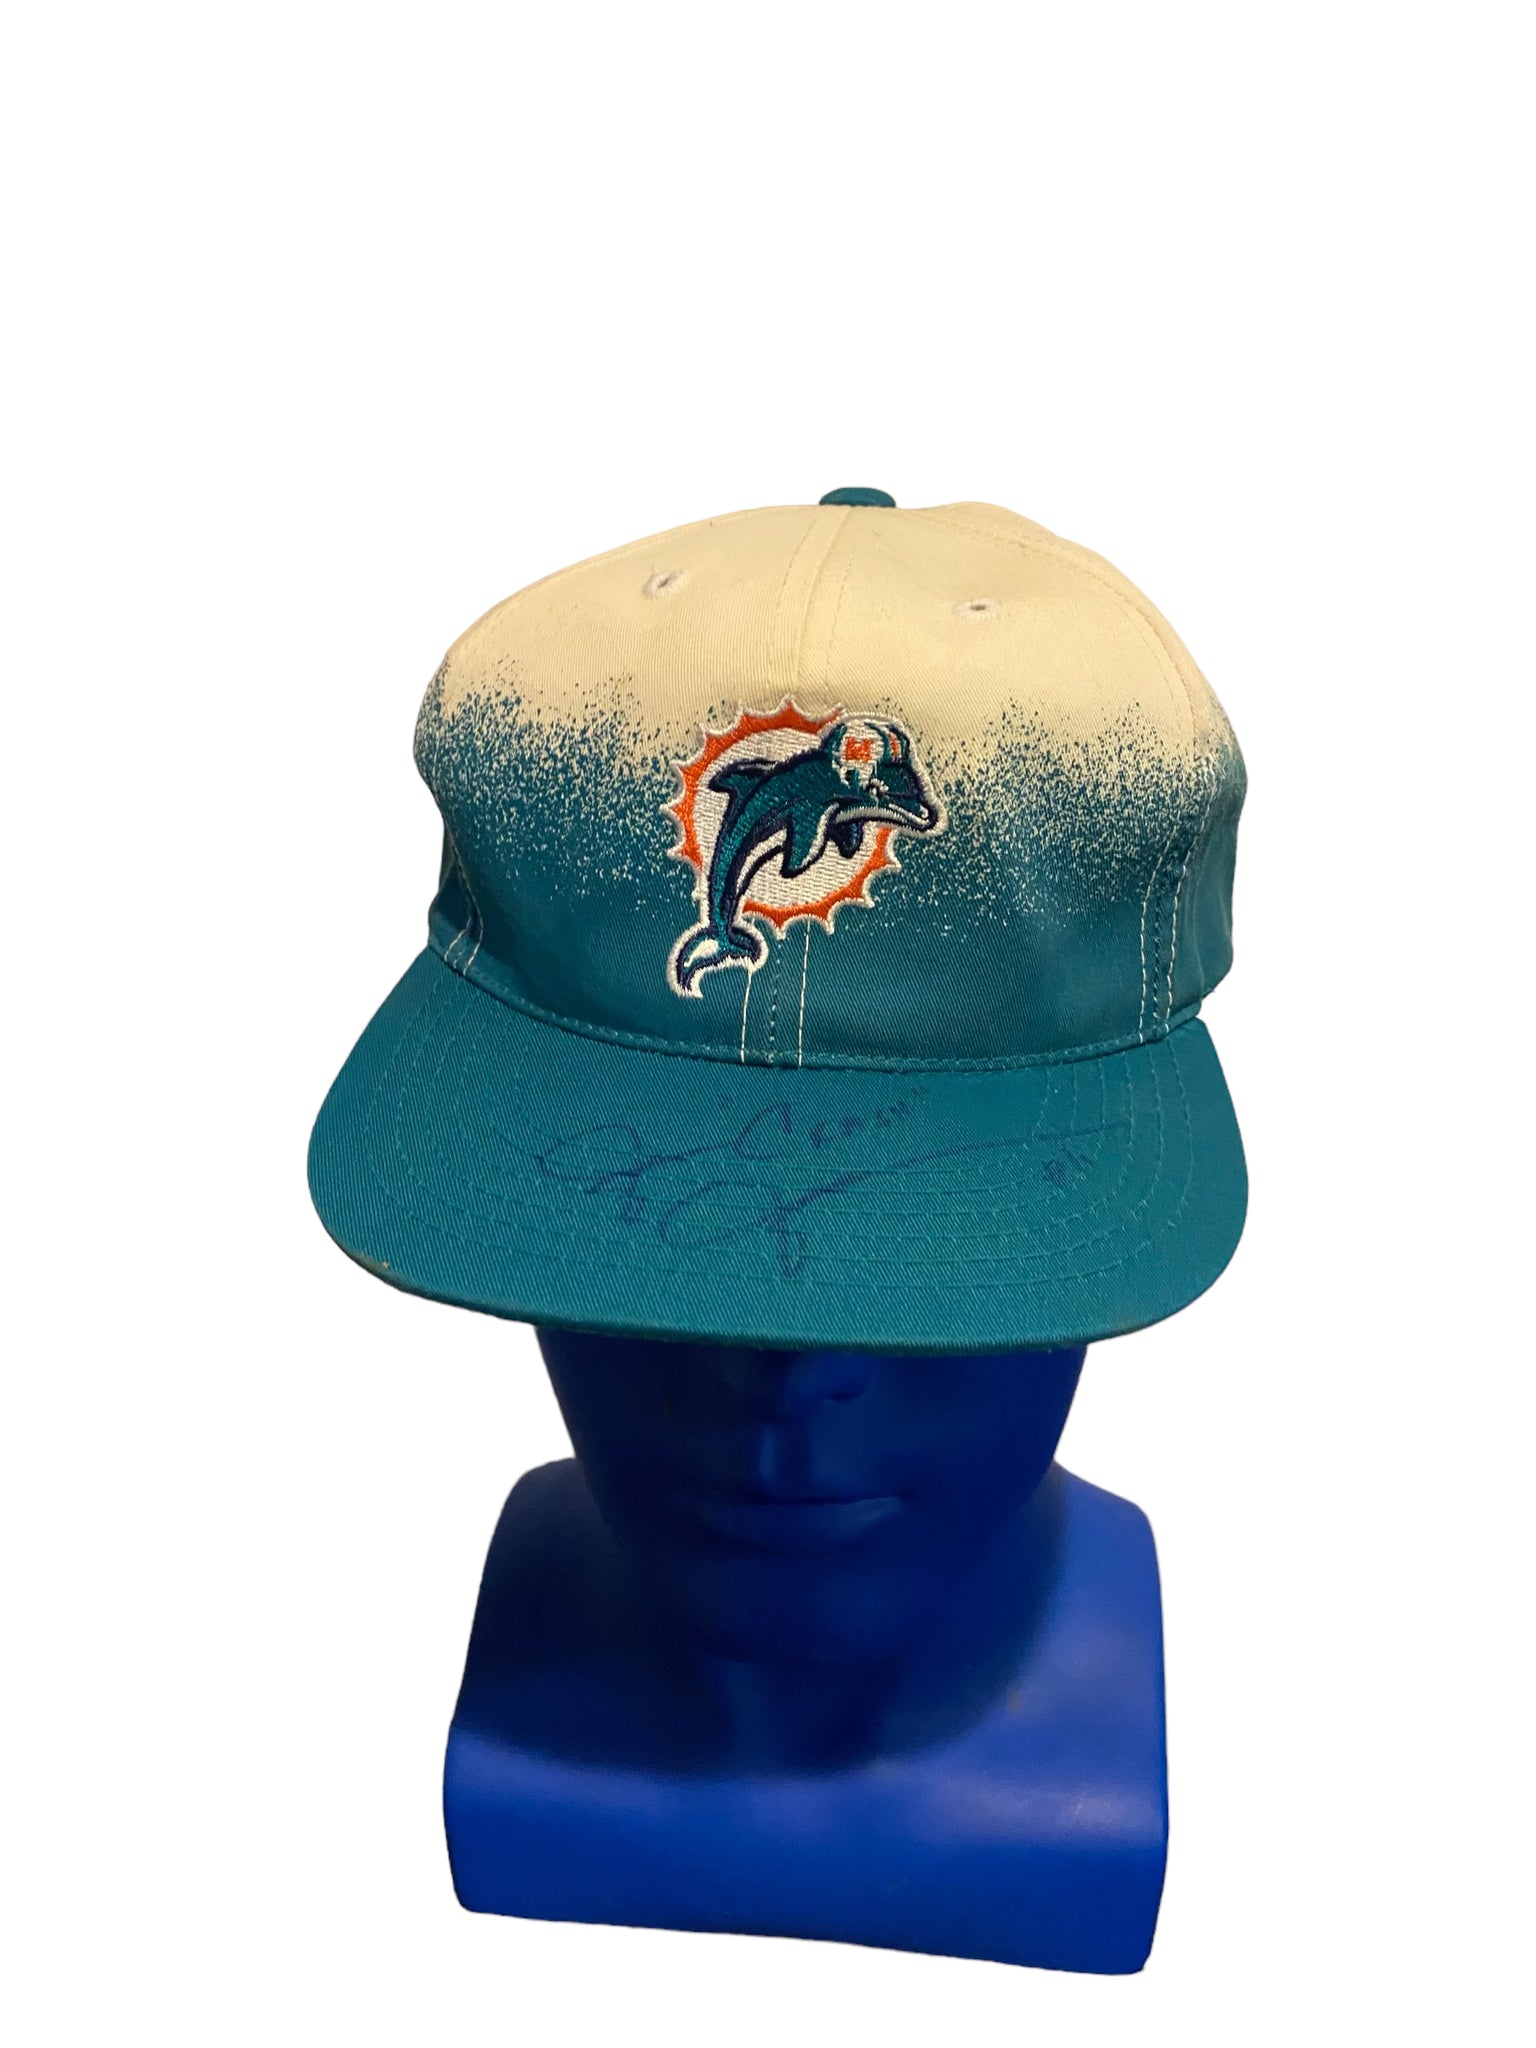 Vintage Annco Miami Dolphins Youth Hat Snapback (read)